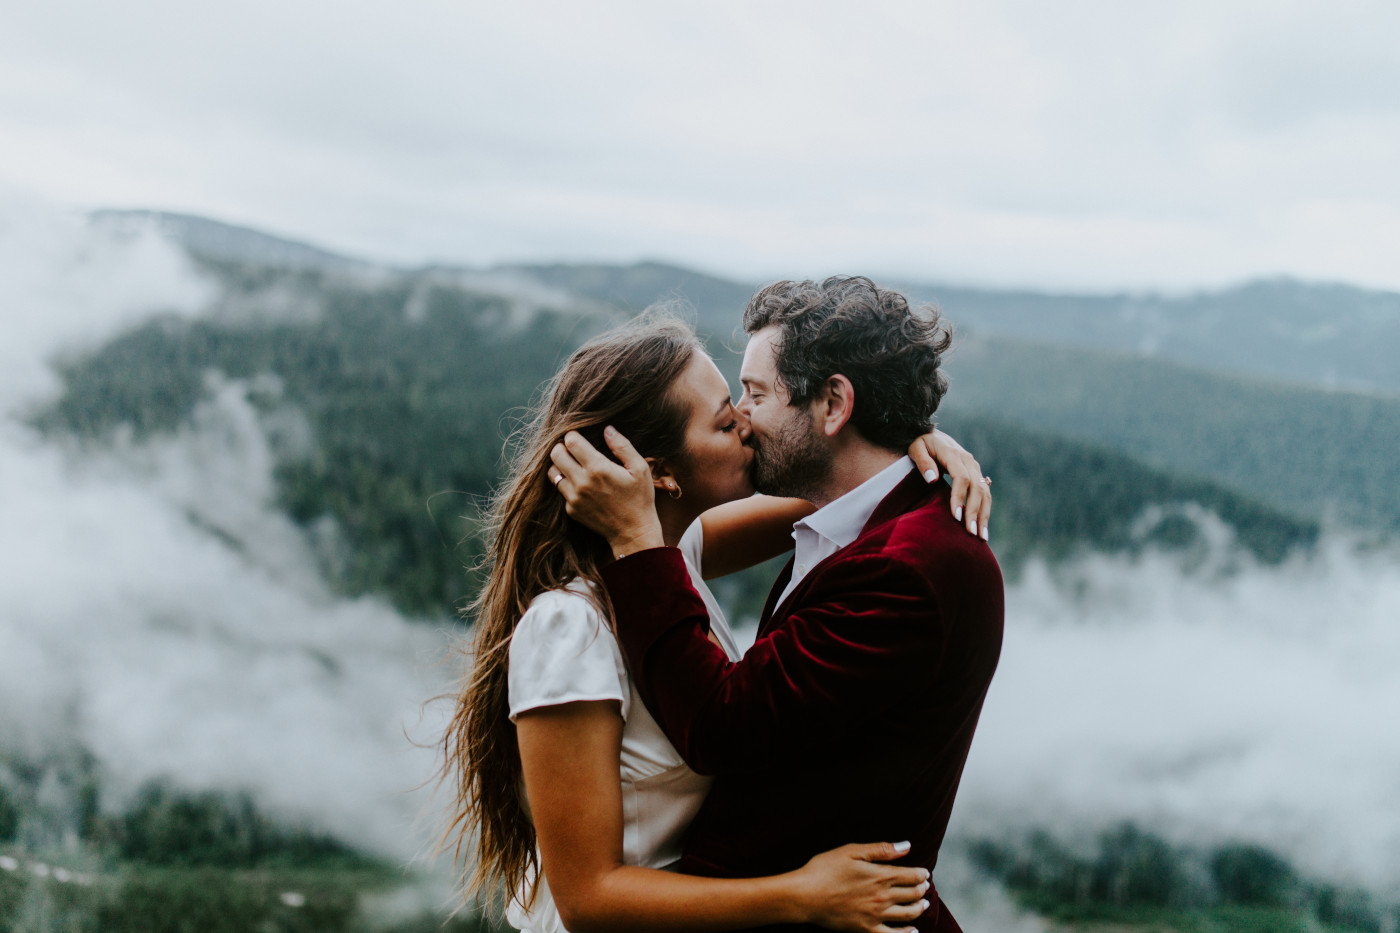 Katelyn and Murray kiss. Elopement wedding photography at Mount Hood by Sienna Plus Josh.